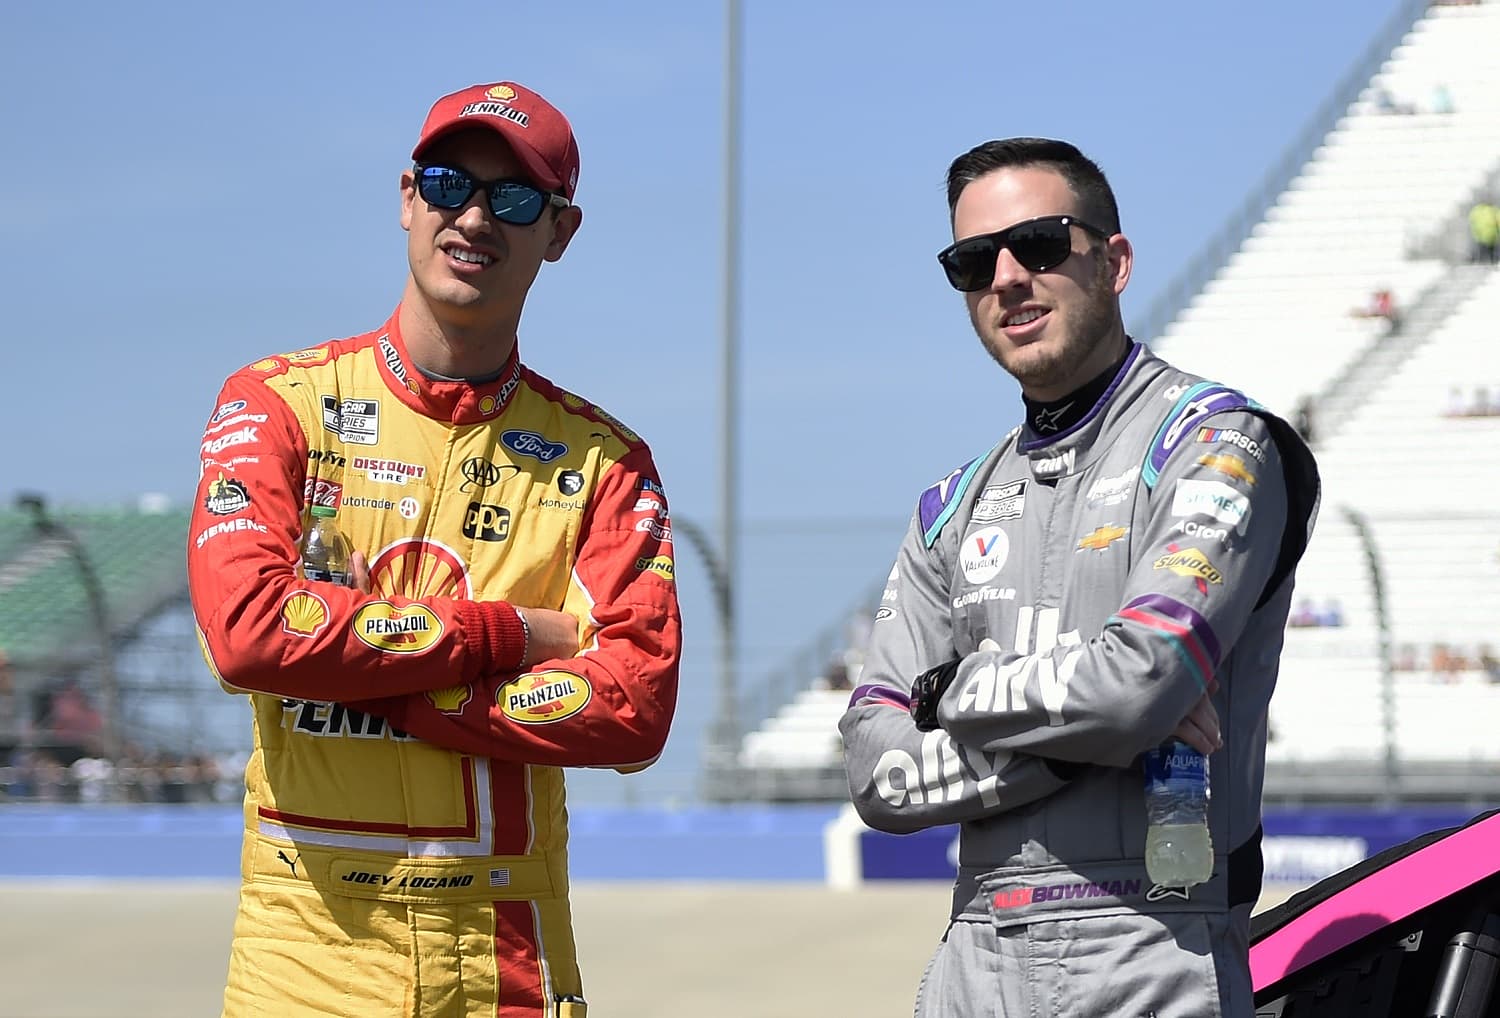 Joey Logano and Alex Bowman talk on the grid during qualifying for the NASCAR Cup Series Ally 400 at Nashville Superspeedway on June 20, 2021.